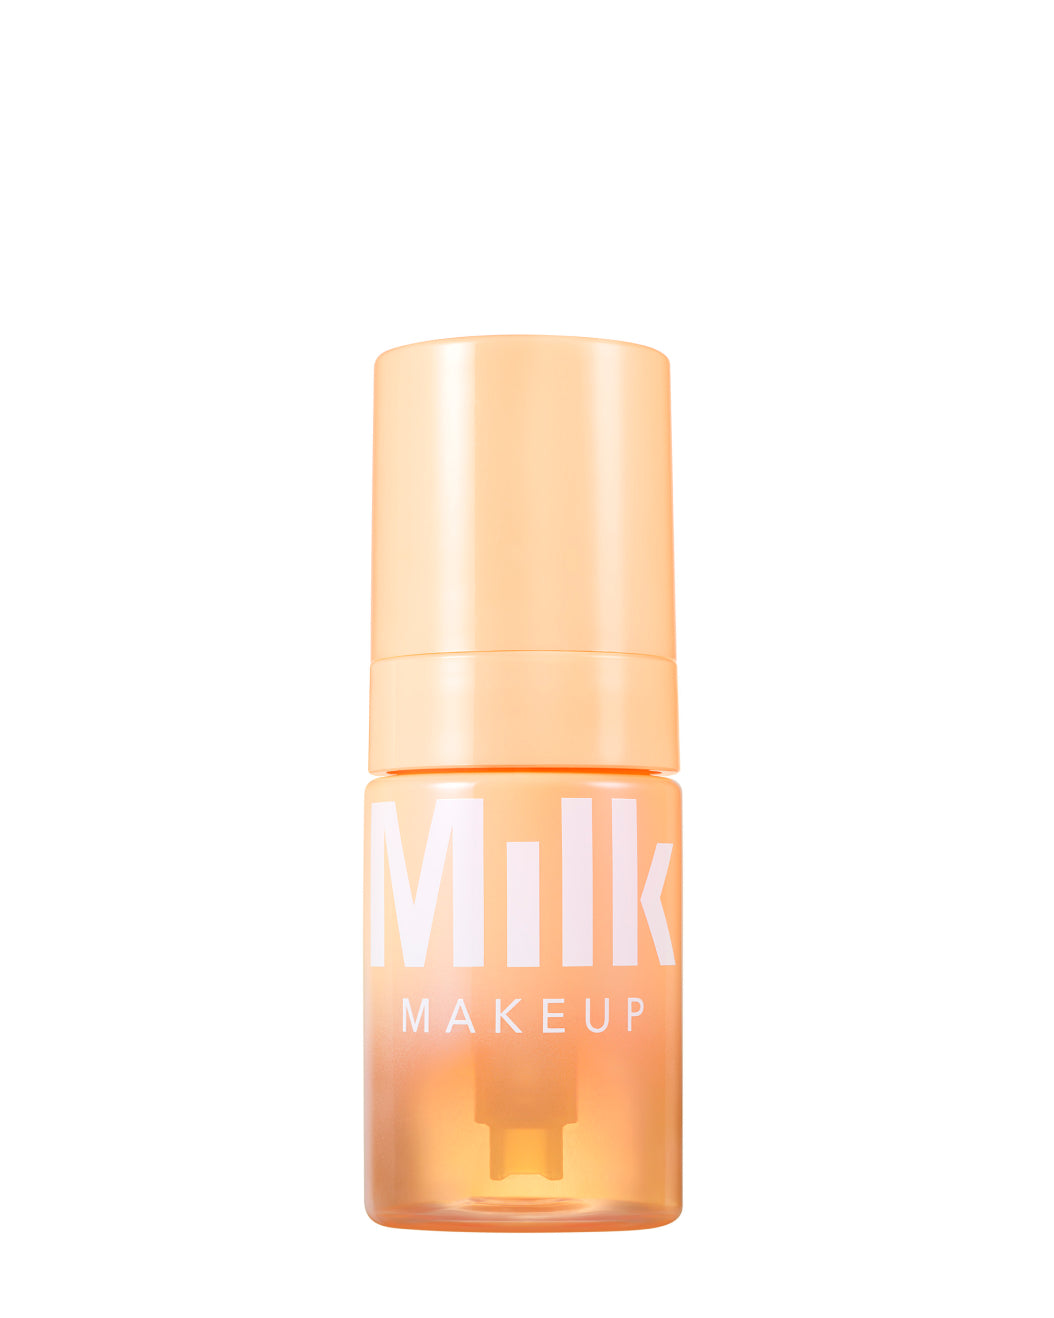 Product shot of Milk Makeup Cloud Glow Priming Foam against a white background